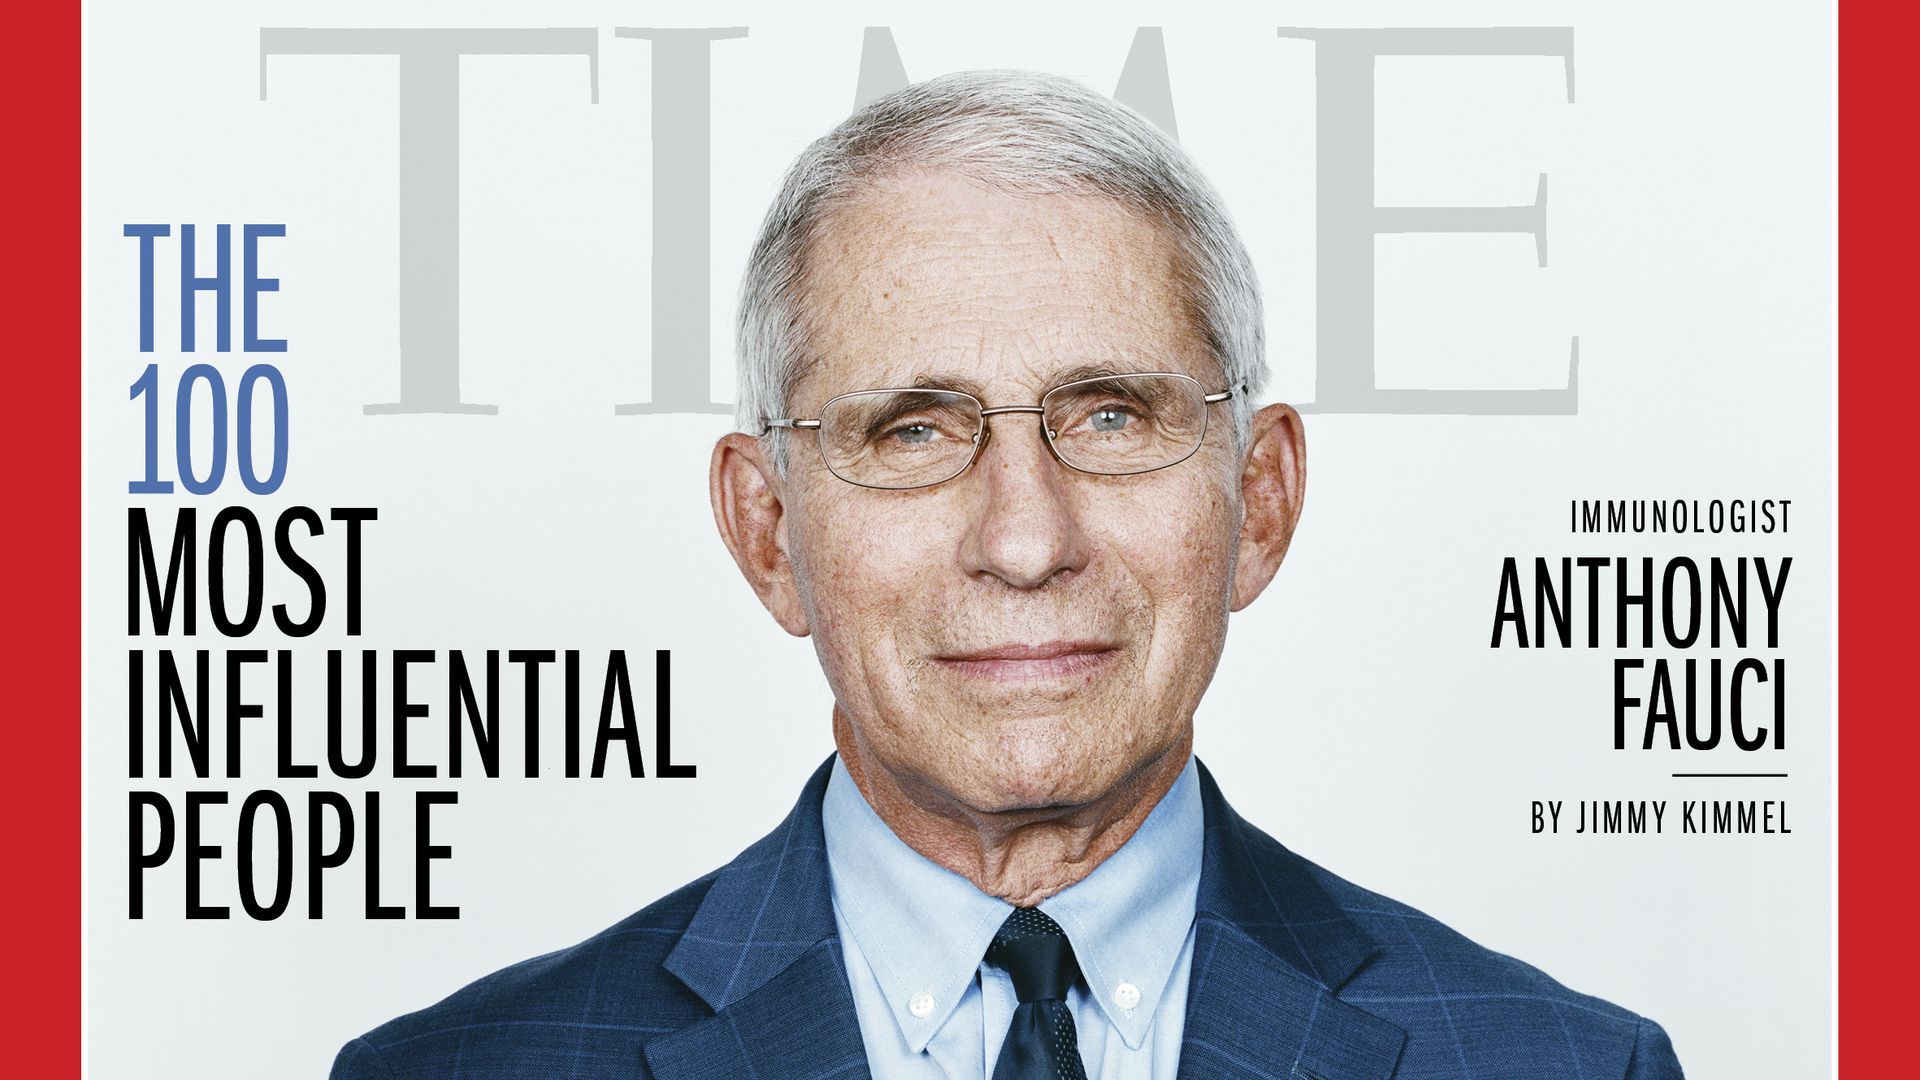 Anthony Fauci on the cover of TIME Magazine